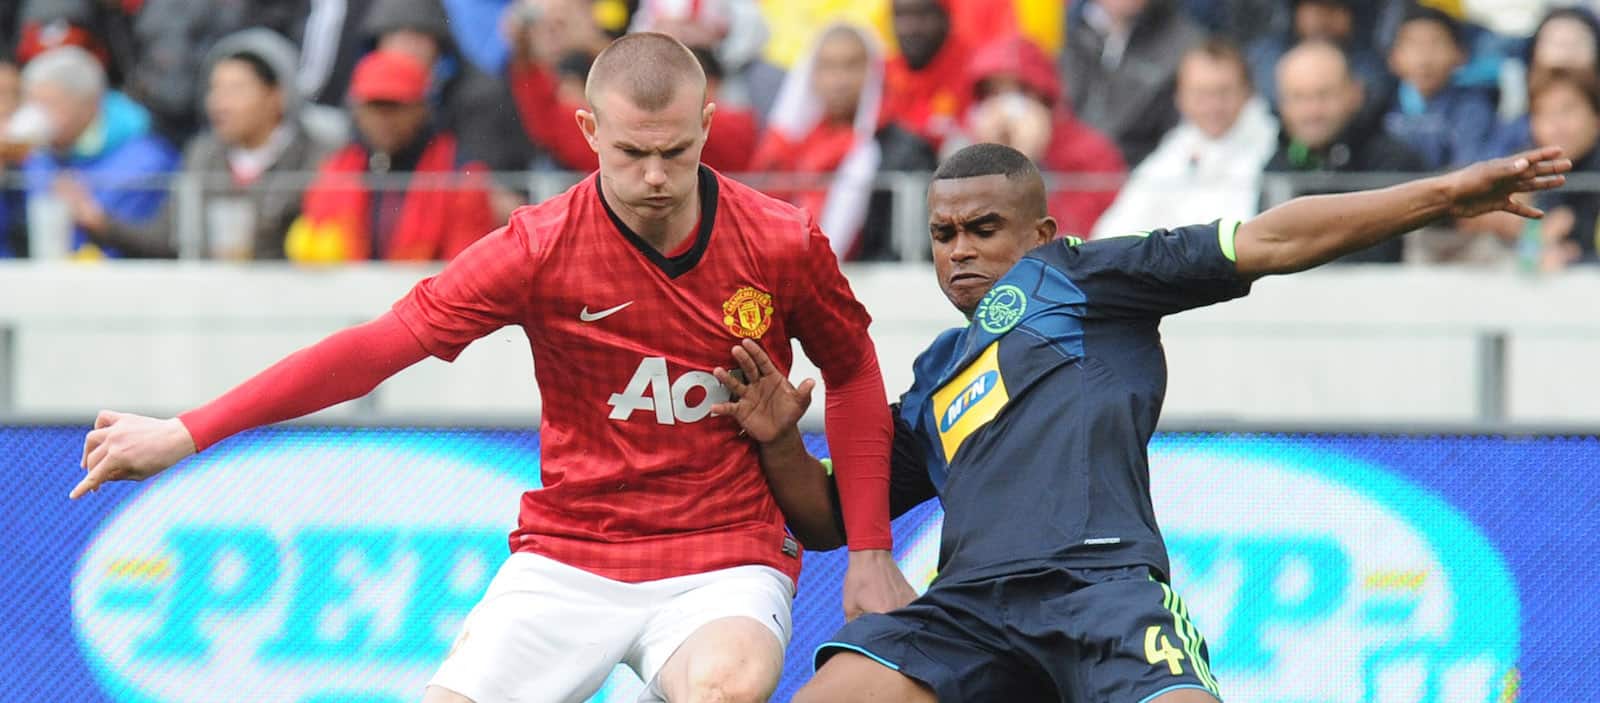 Ryan Tunnicliffe fitxa per l'Adelaide United - Man United News And Transfer News